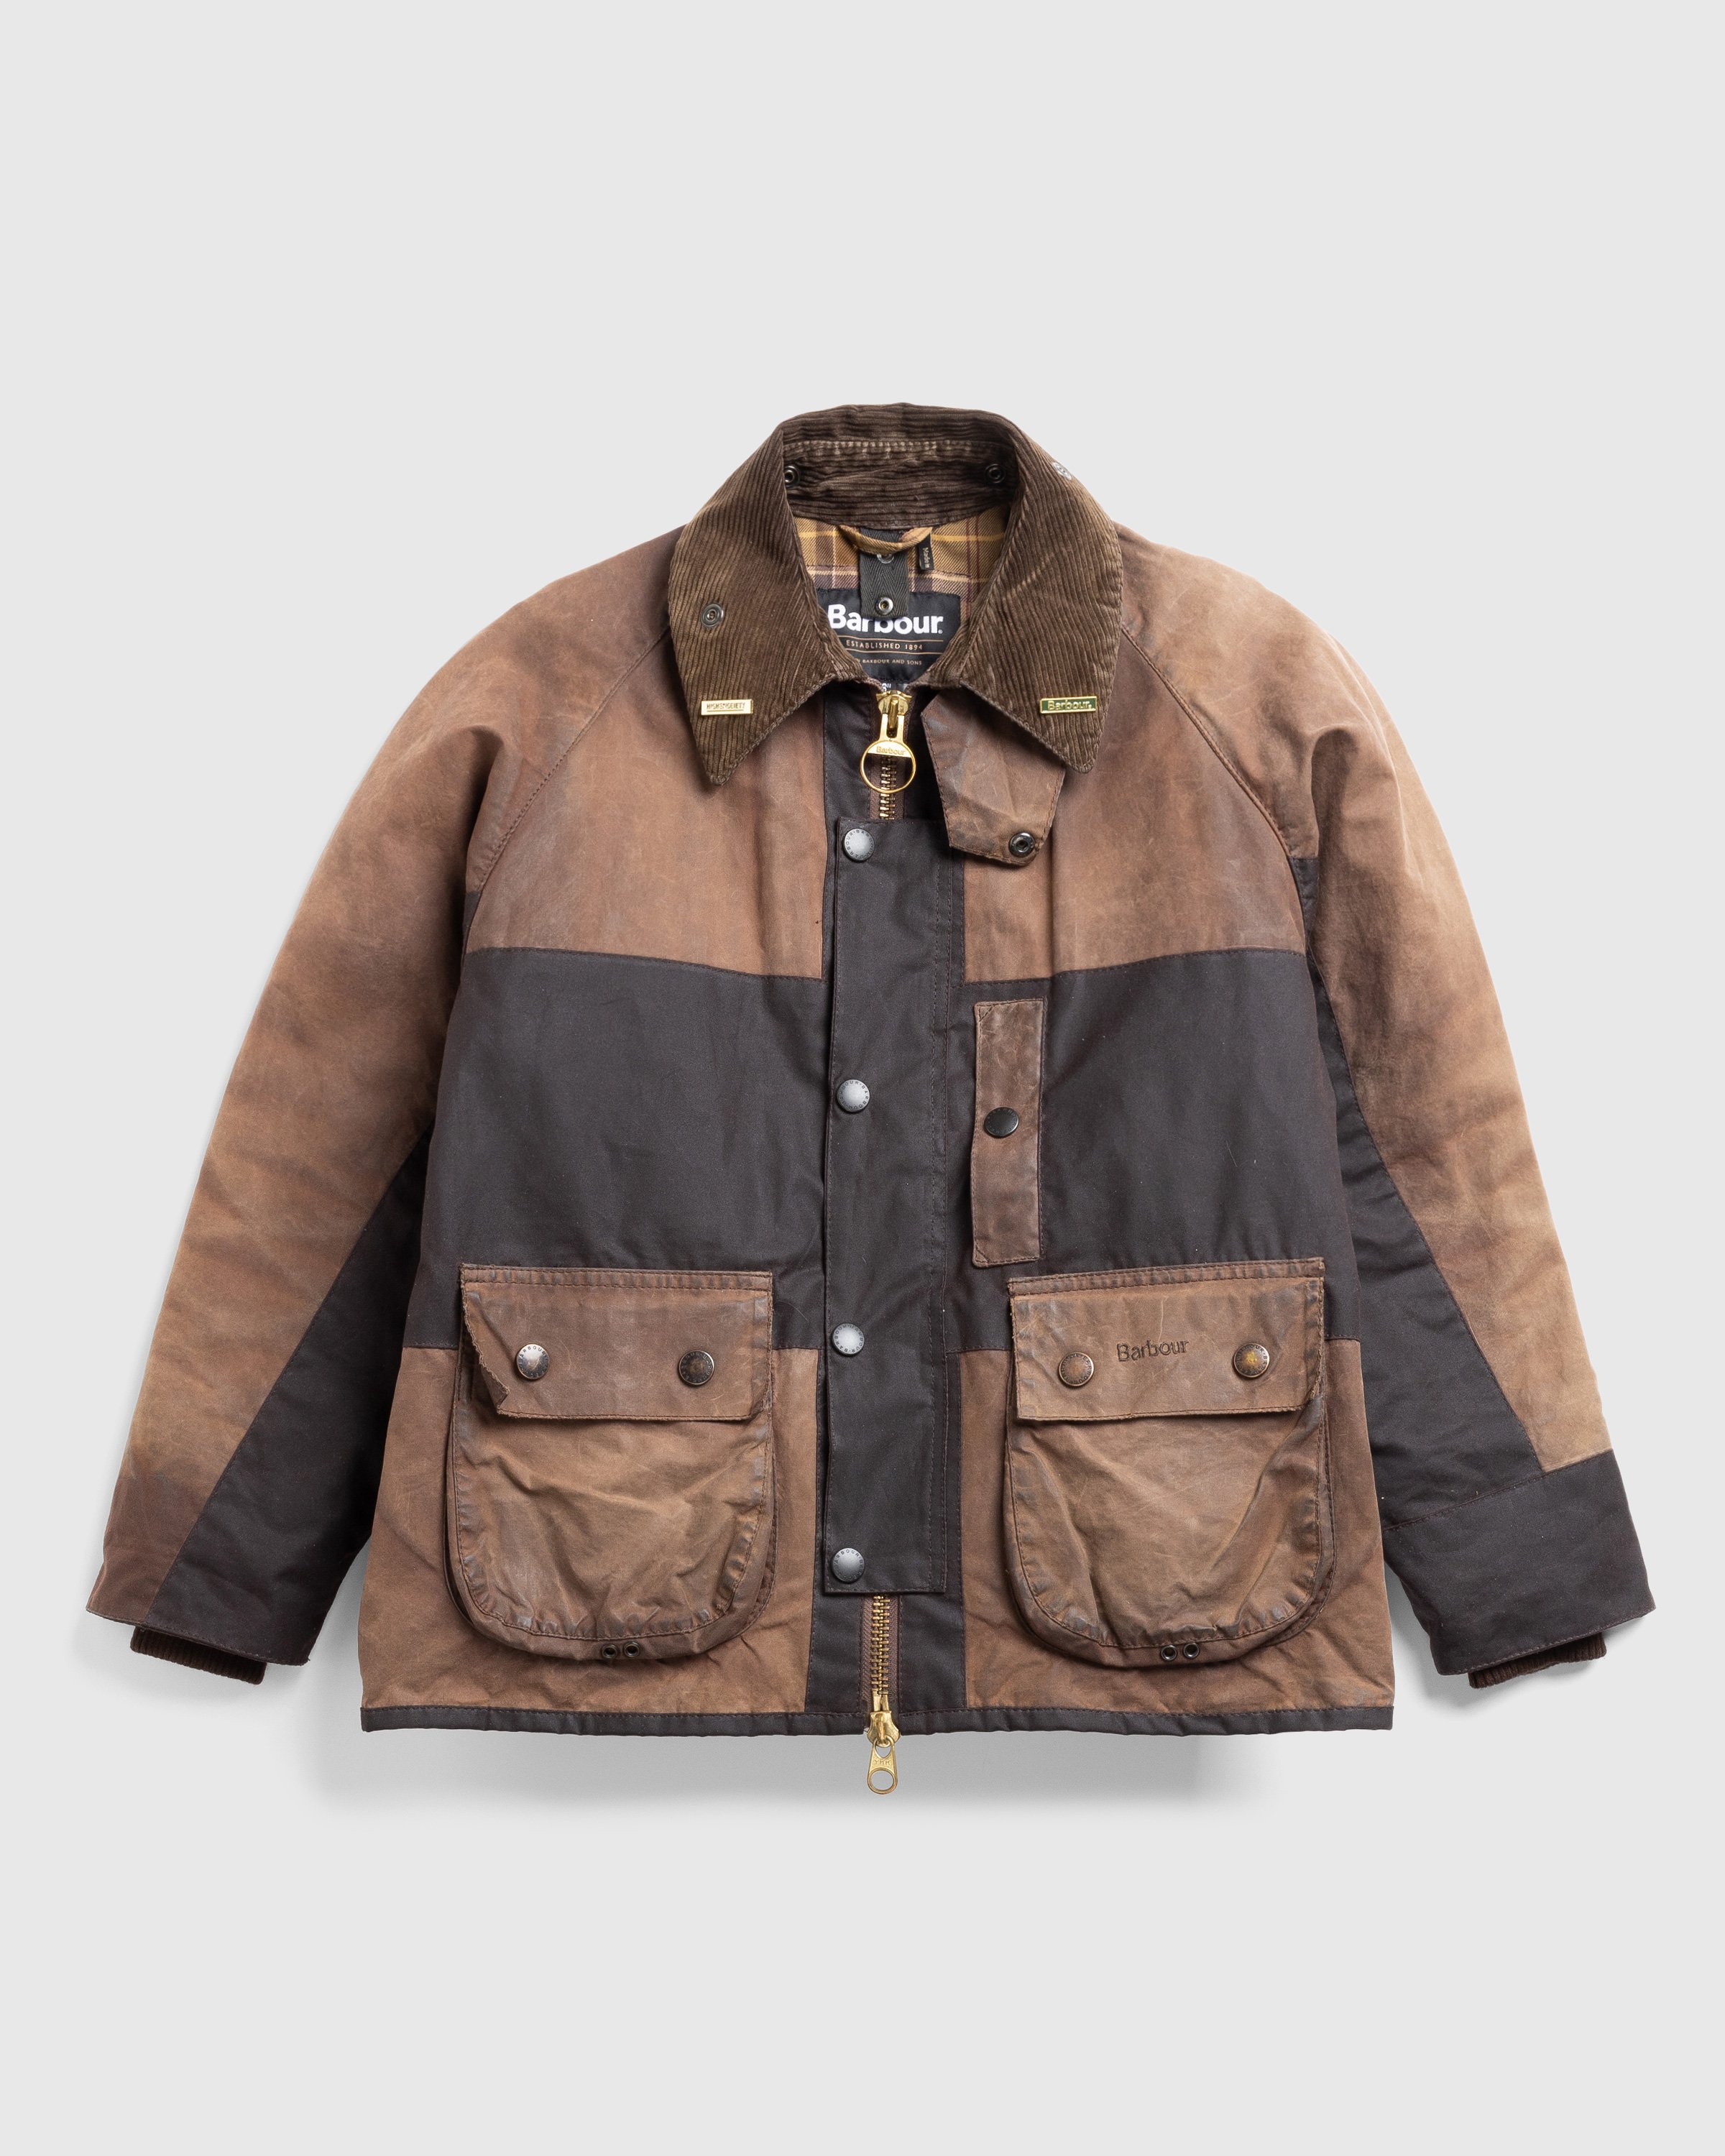 Barbour x Highsnobiety - Re-Loved Cropped Bedale Jacket 1 - 36 - Rusty-Brown - Clothing -  - Image 1